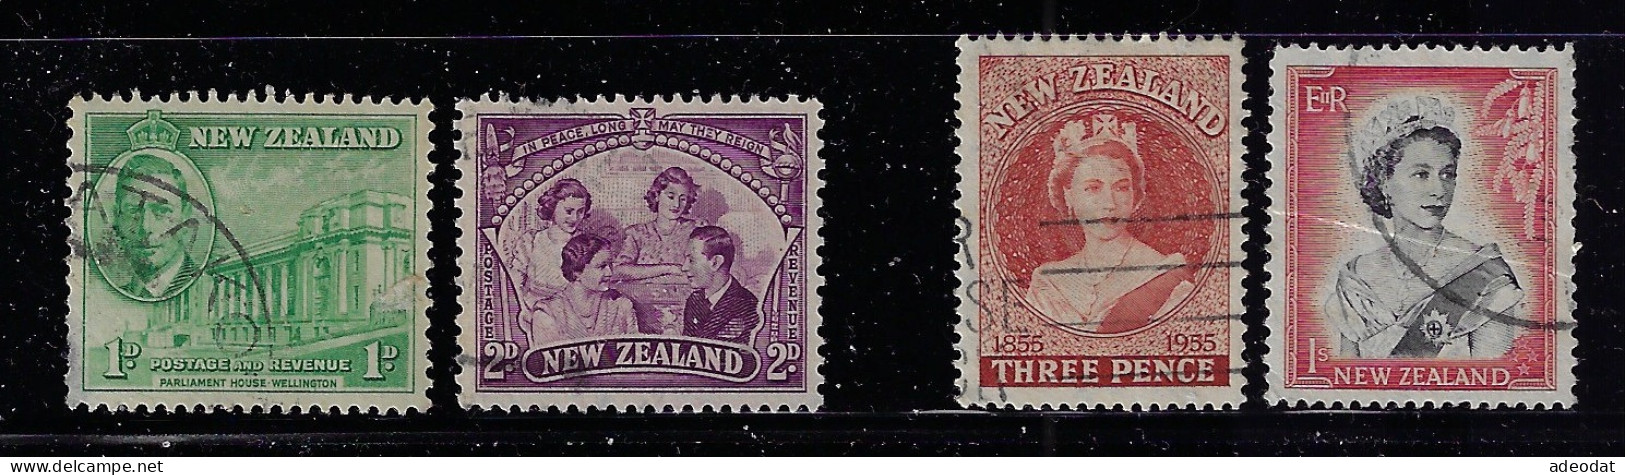 NEW ZEALAND 1946,1955 PARLIAMENT HOUSE,ROYAL FAMILY,THE QUEEN  SCOTT #248,250,297,303 USED - Oblitérés